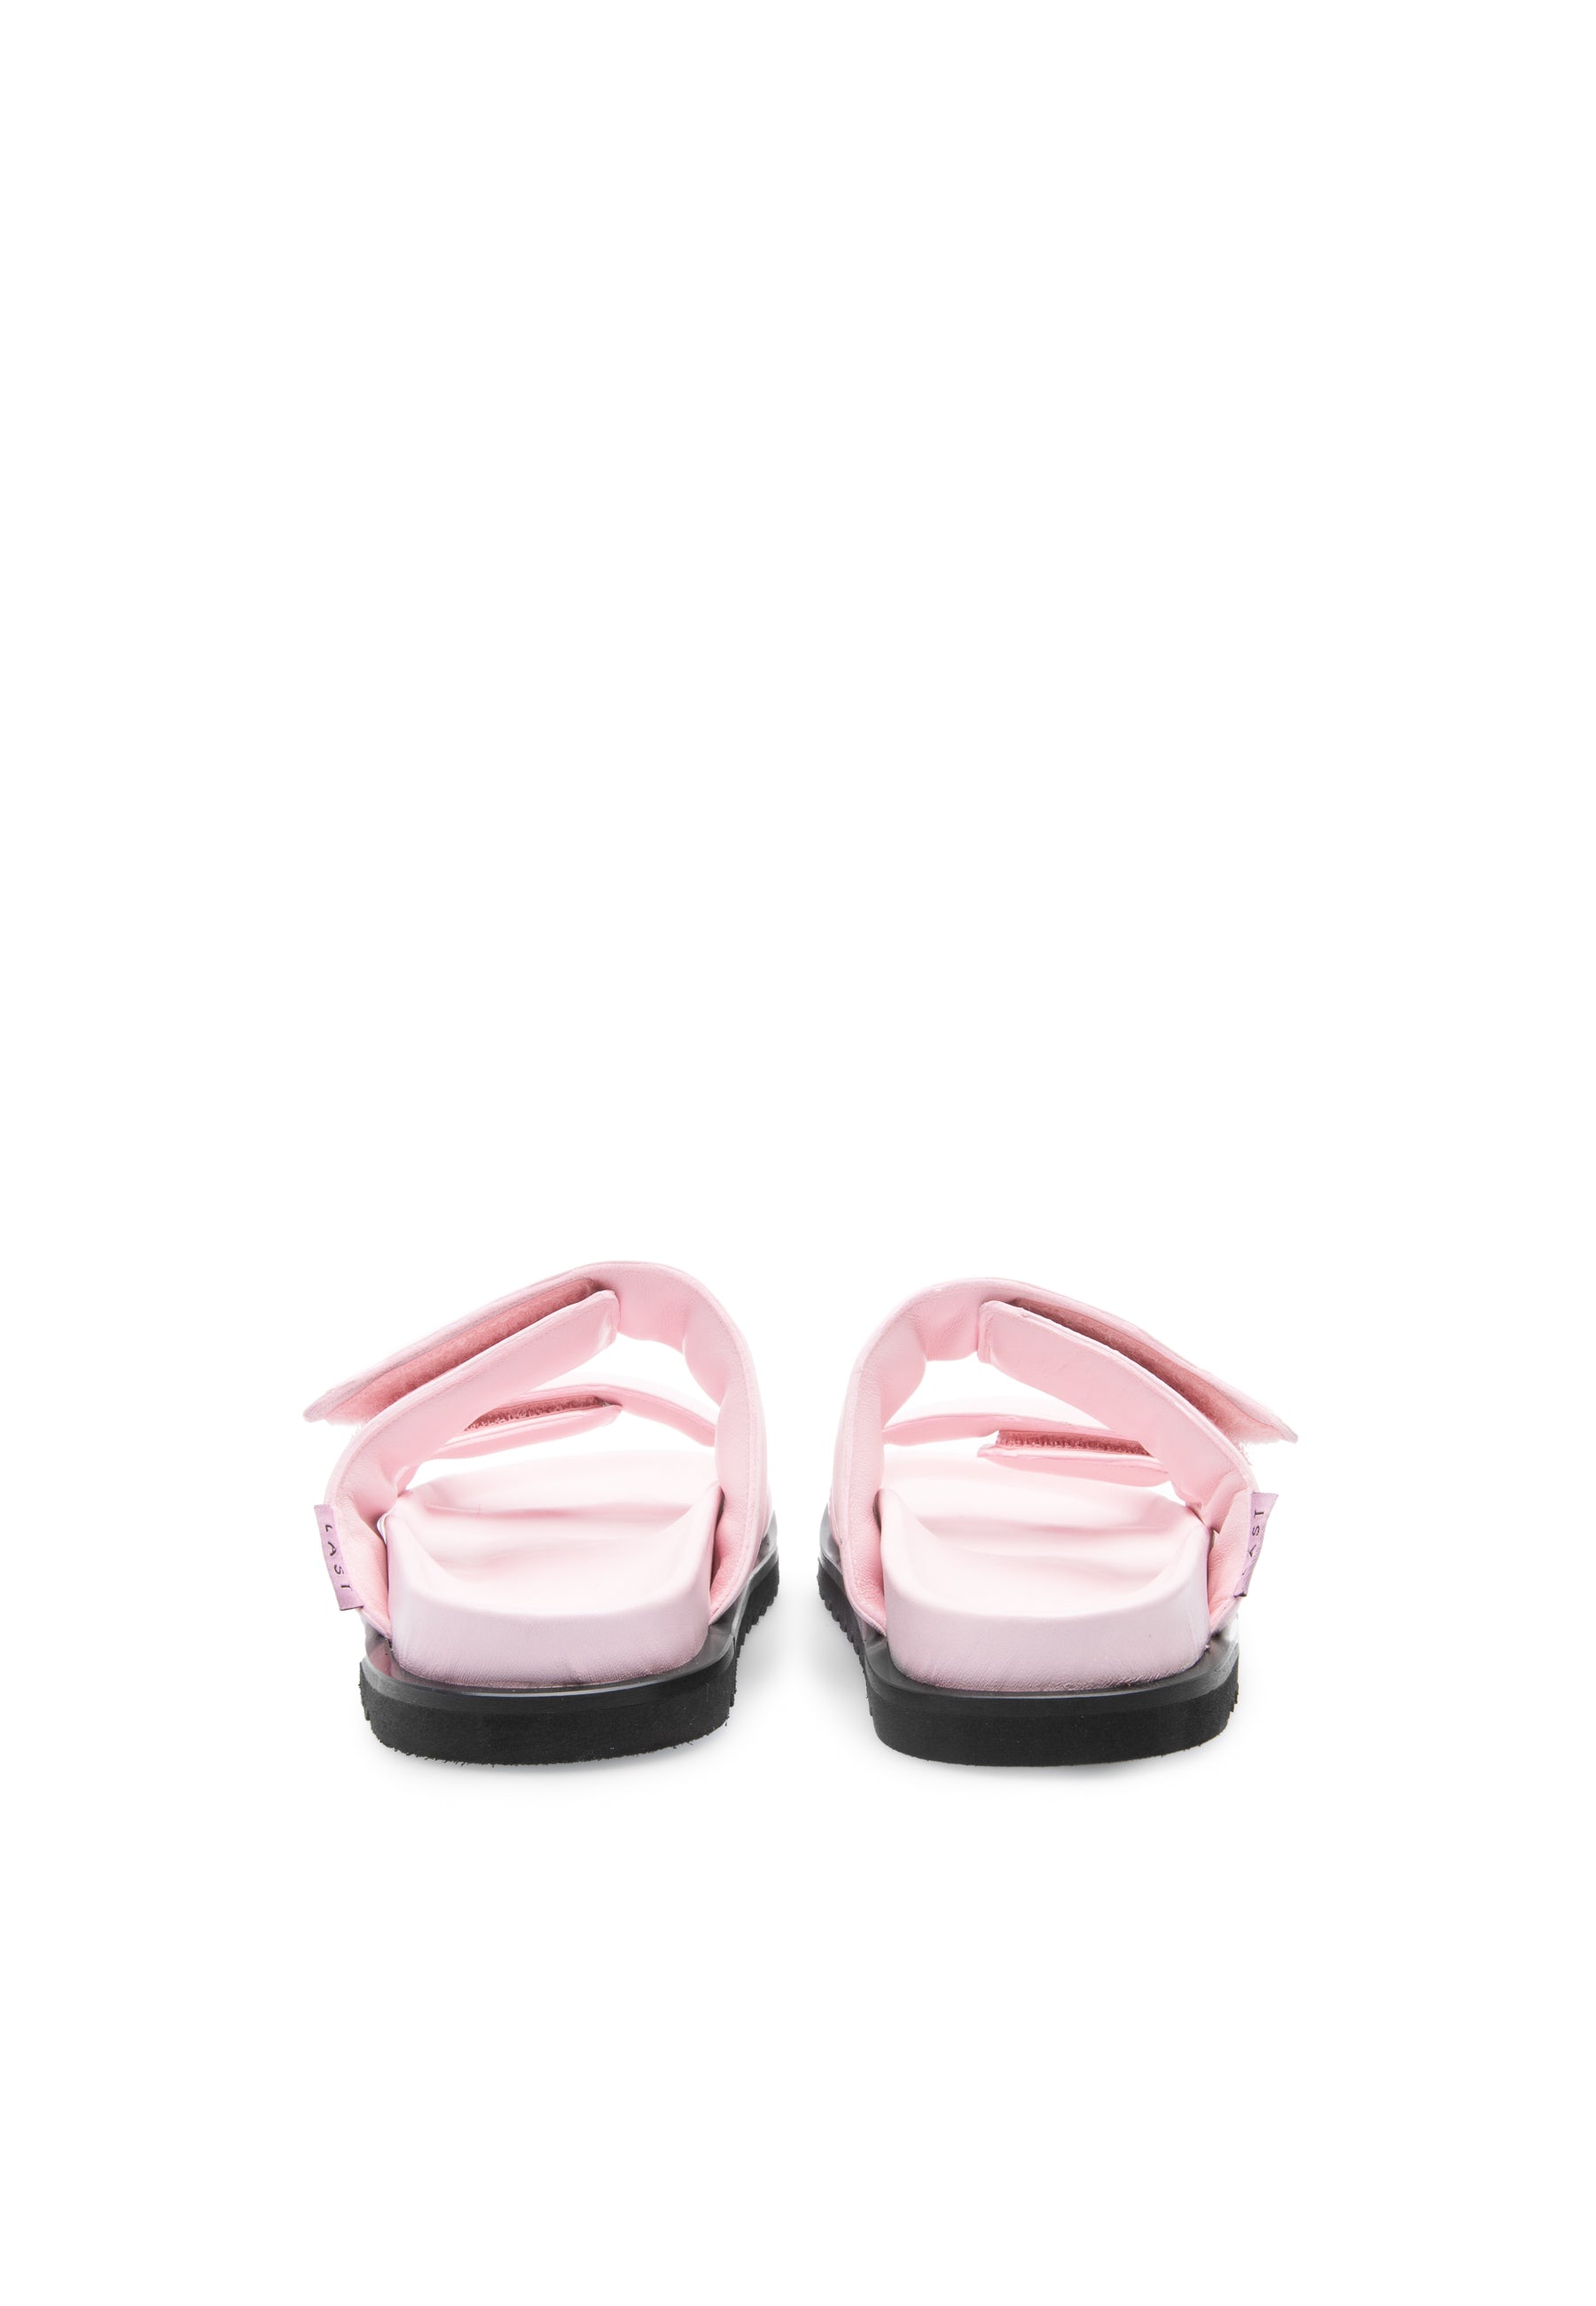 Corine Pink Leather Puffy Sandals LAST1515 - 5